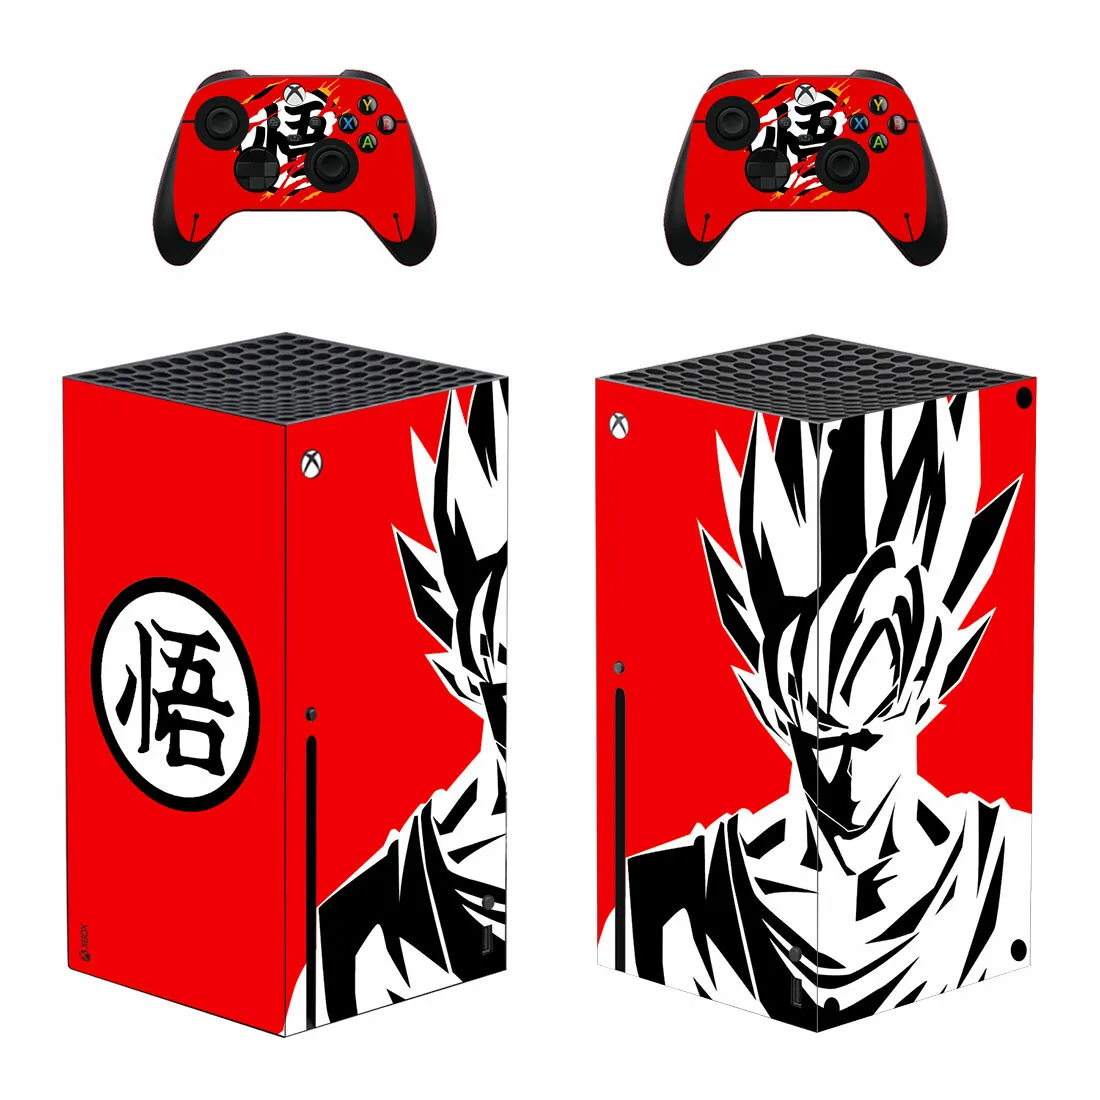 

Anime Goku Vegeta Skin Sticker Decal Cover for Xbox Series X Console and 2 Controllers Xbox Series X Skin Sticker Vinyl